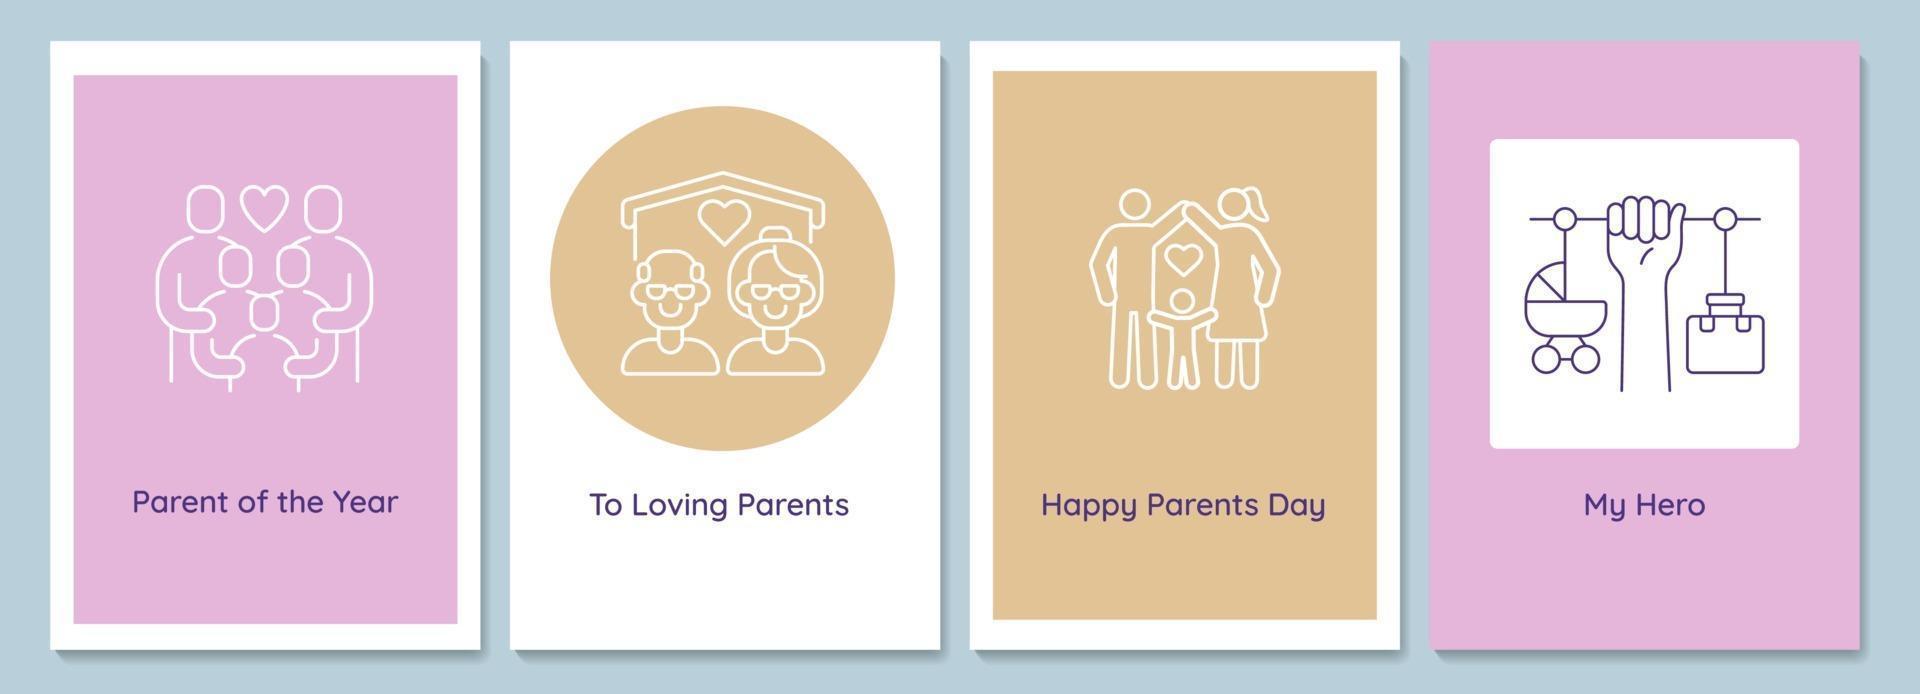 Celebrating parents day postcards with linear glyph icon set vector